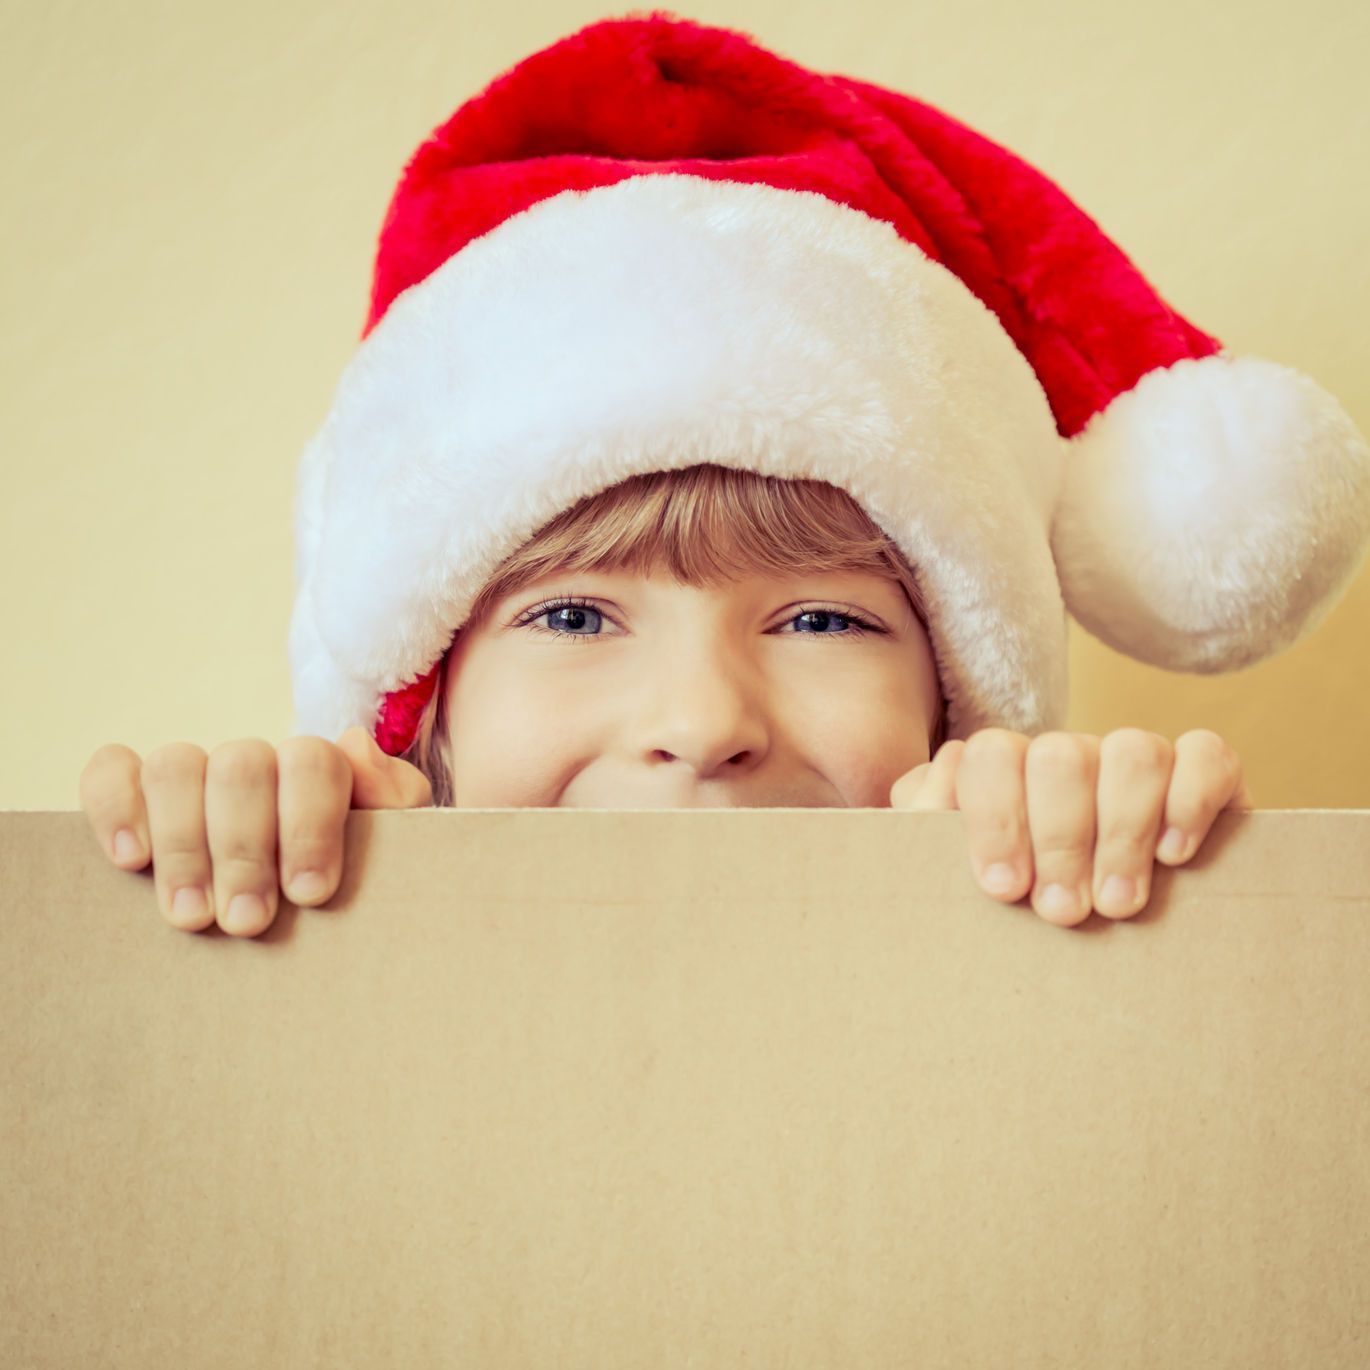 The Santa Dilemma: When Older Siblings Know The Truth